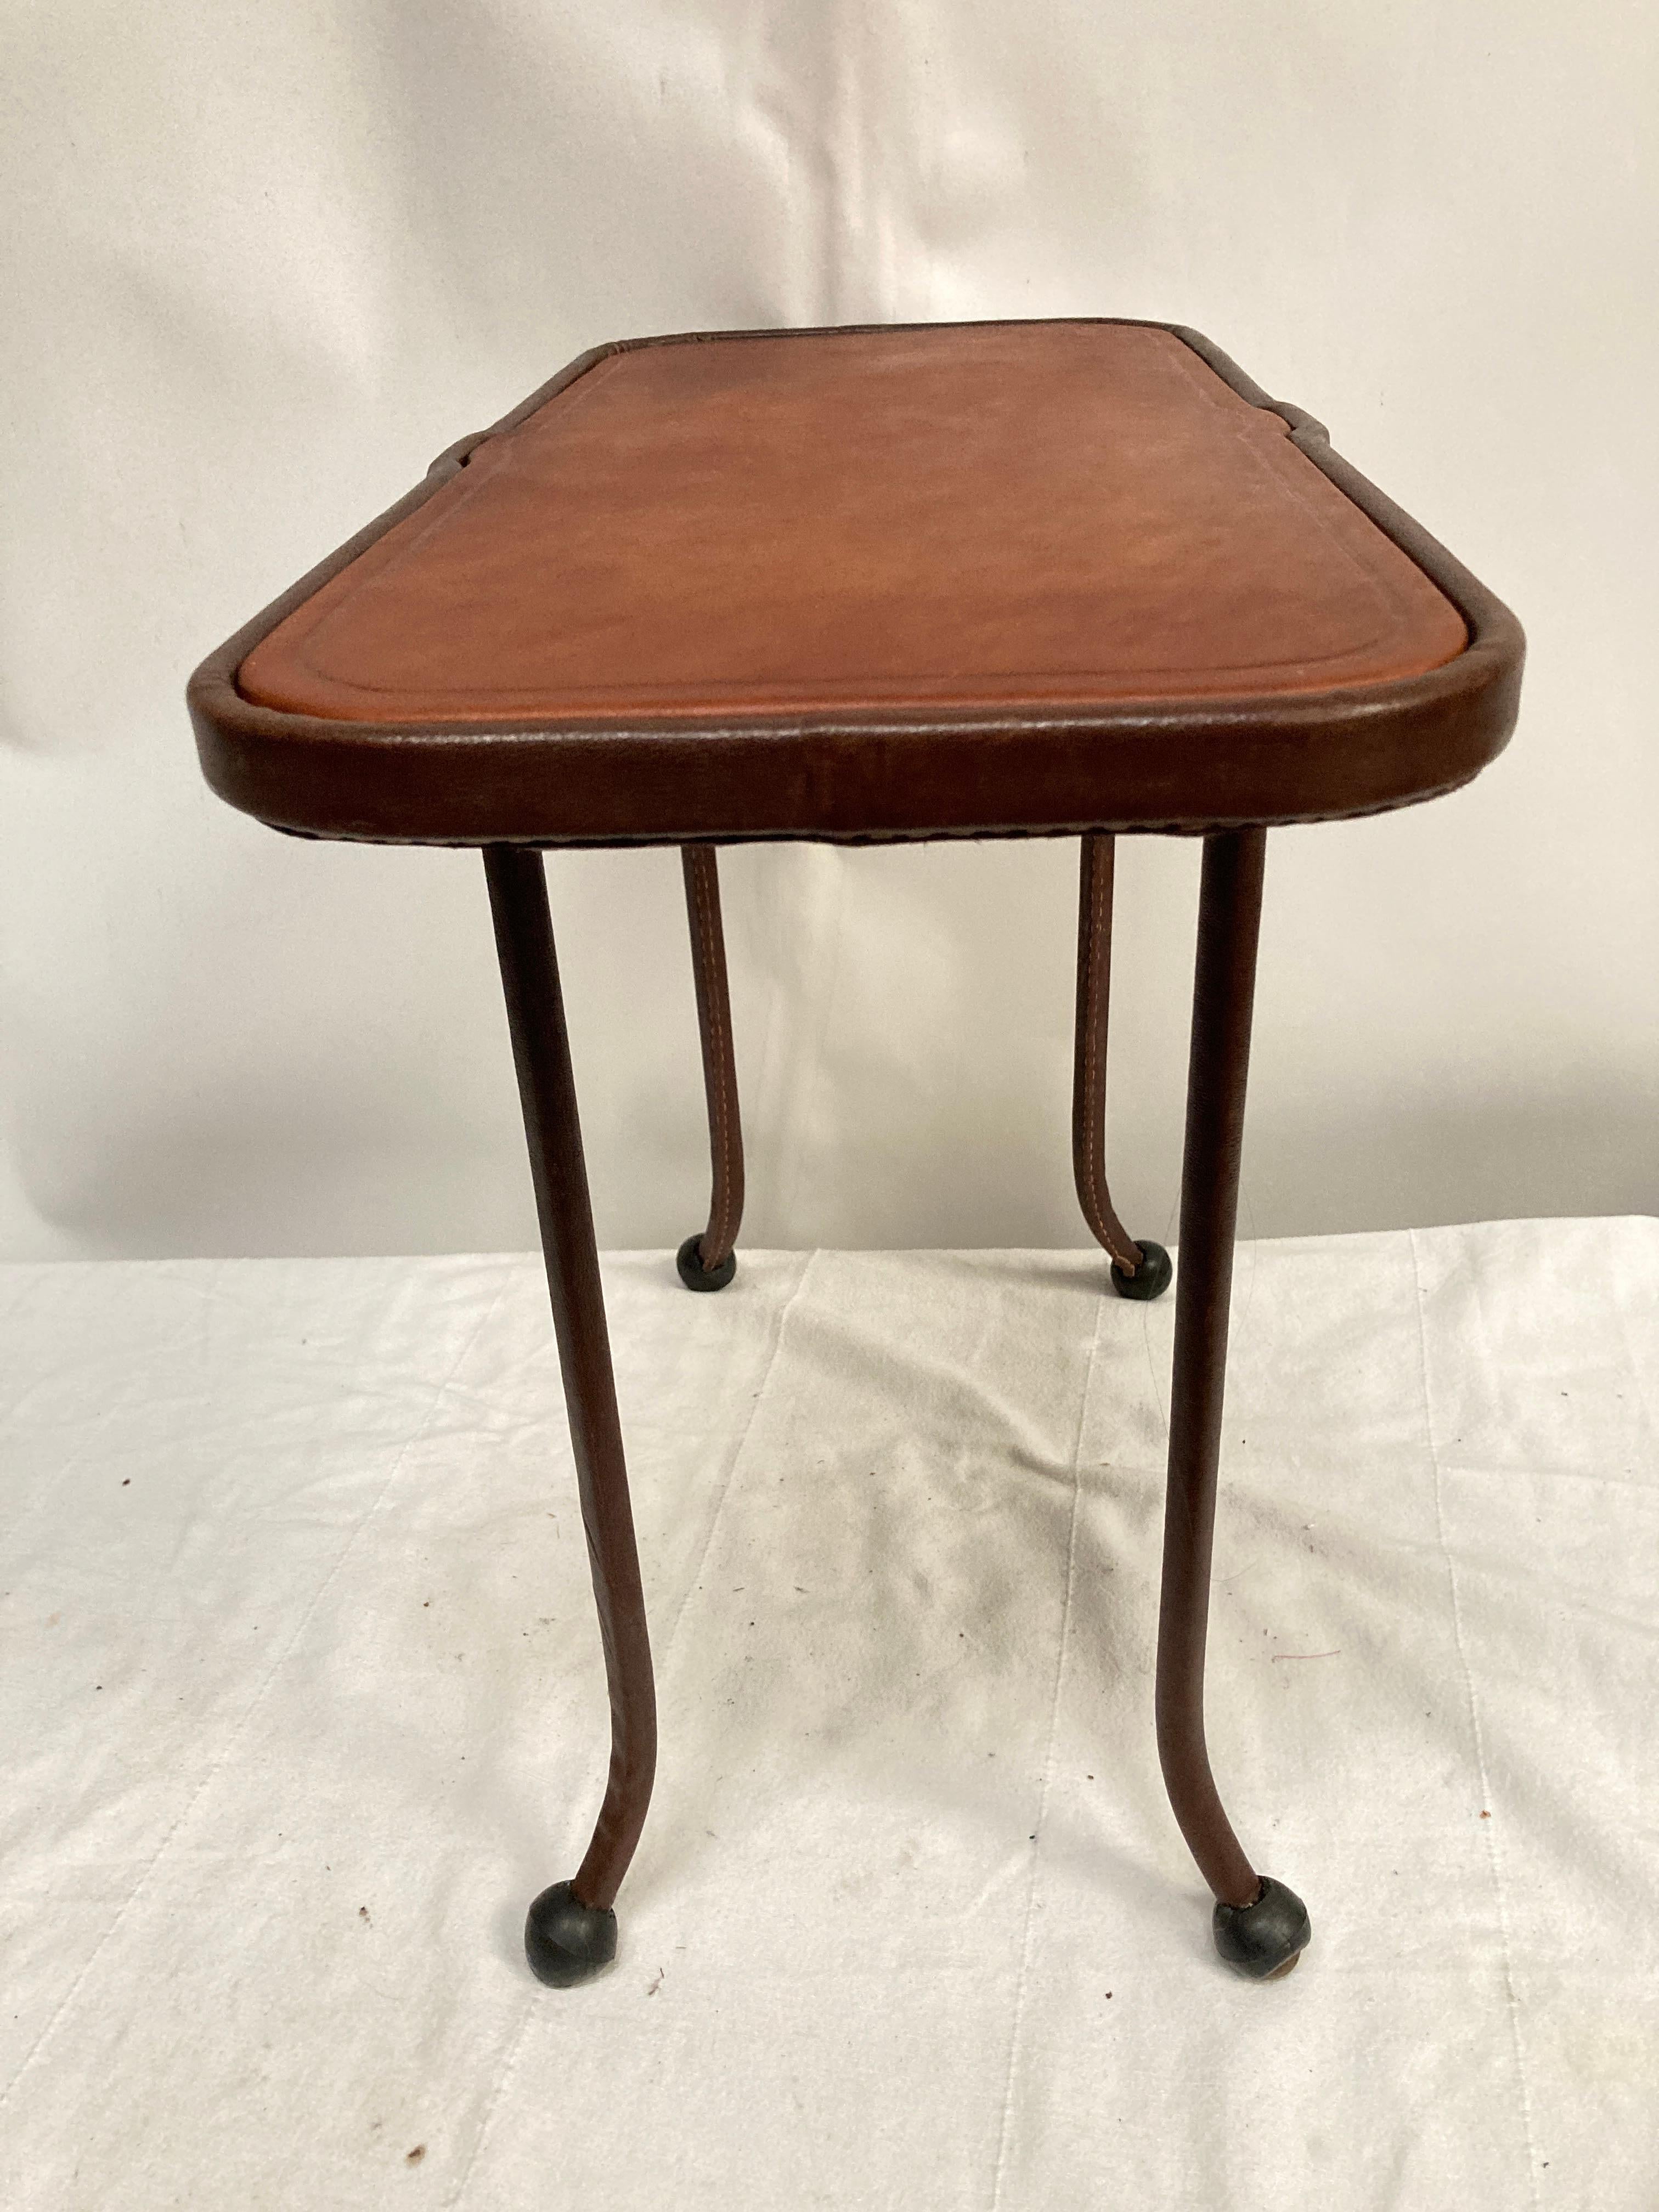 1950's Stitched leather side table by Jacques Adnet For Sale 2